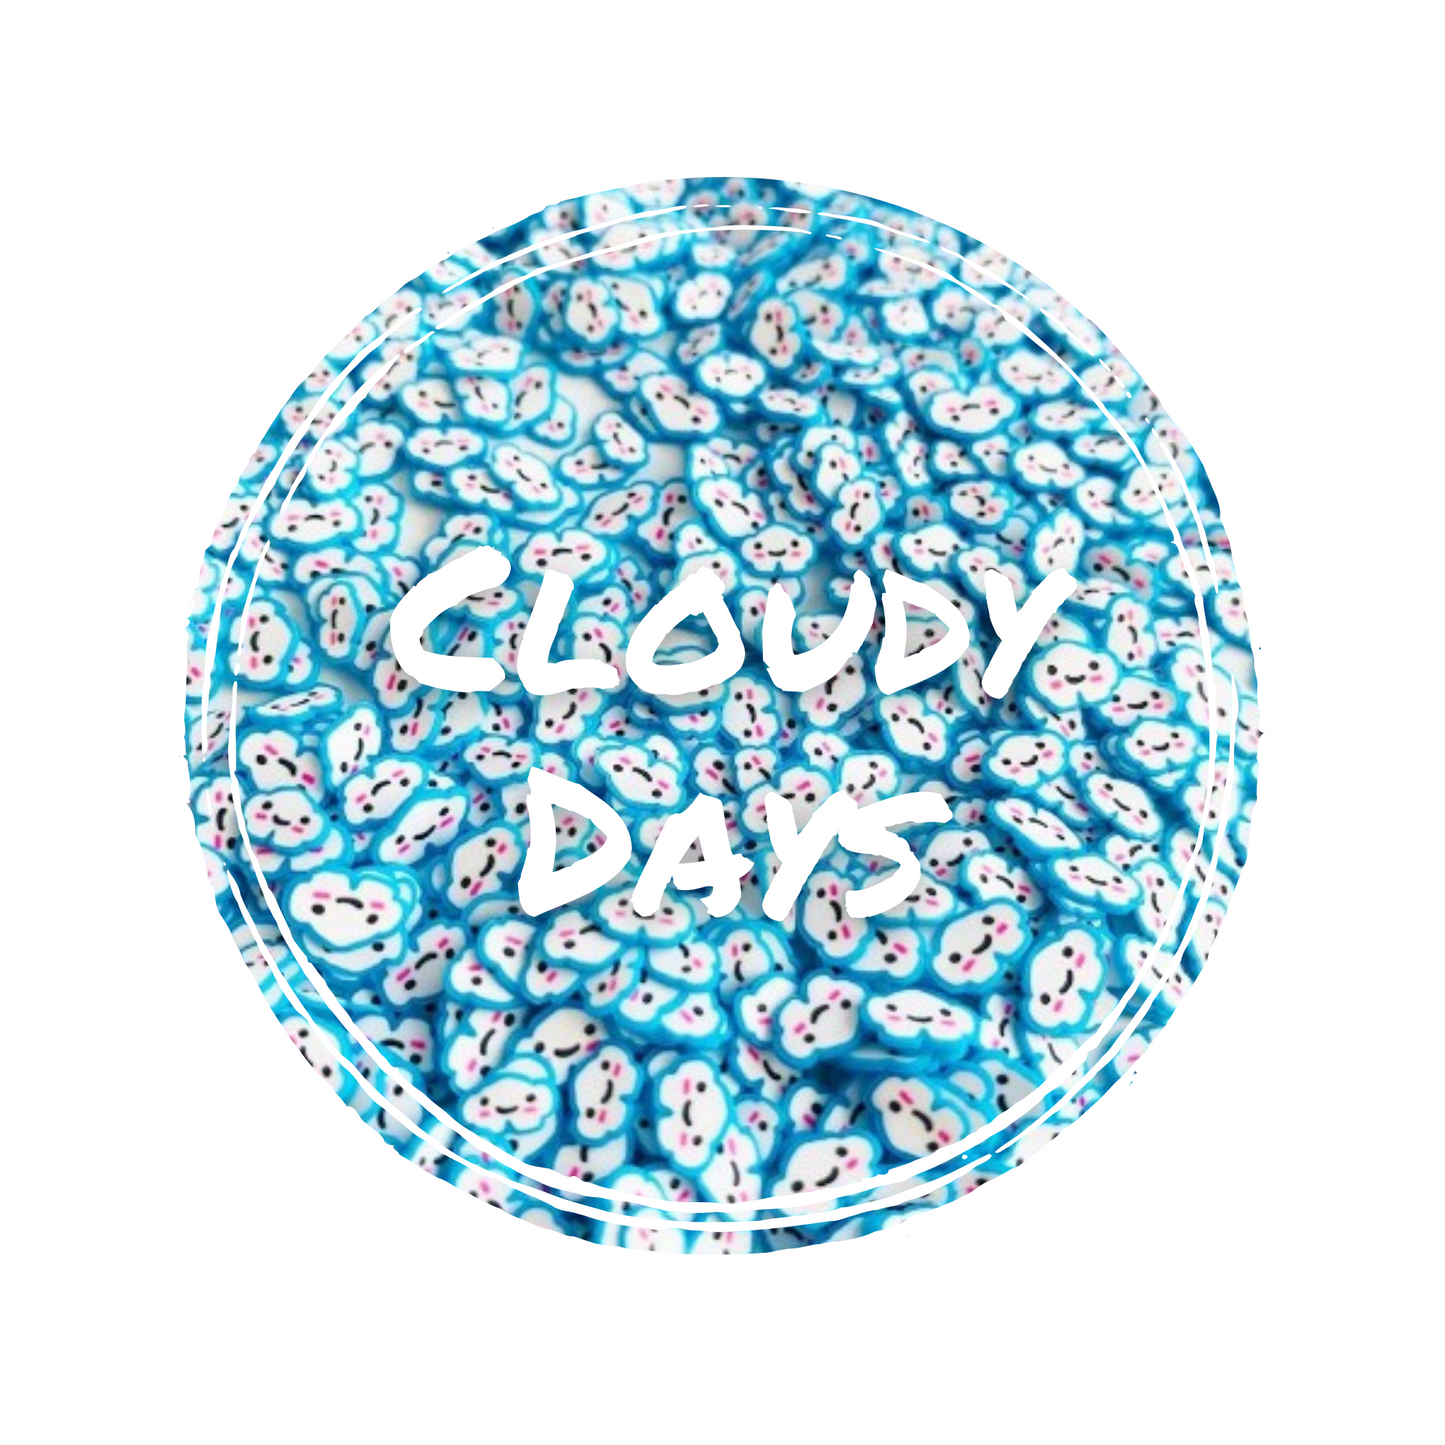 Cloudy Days - Polymer Clay cloud slices